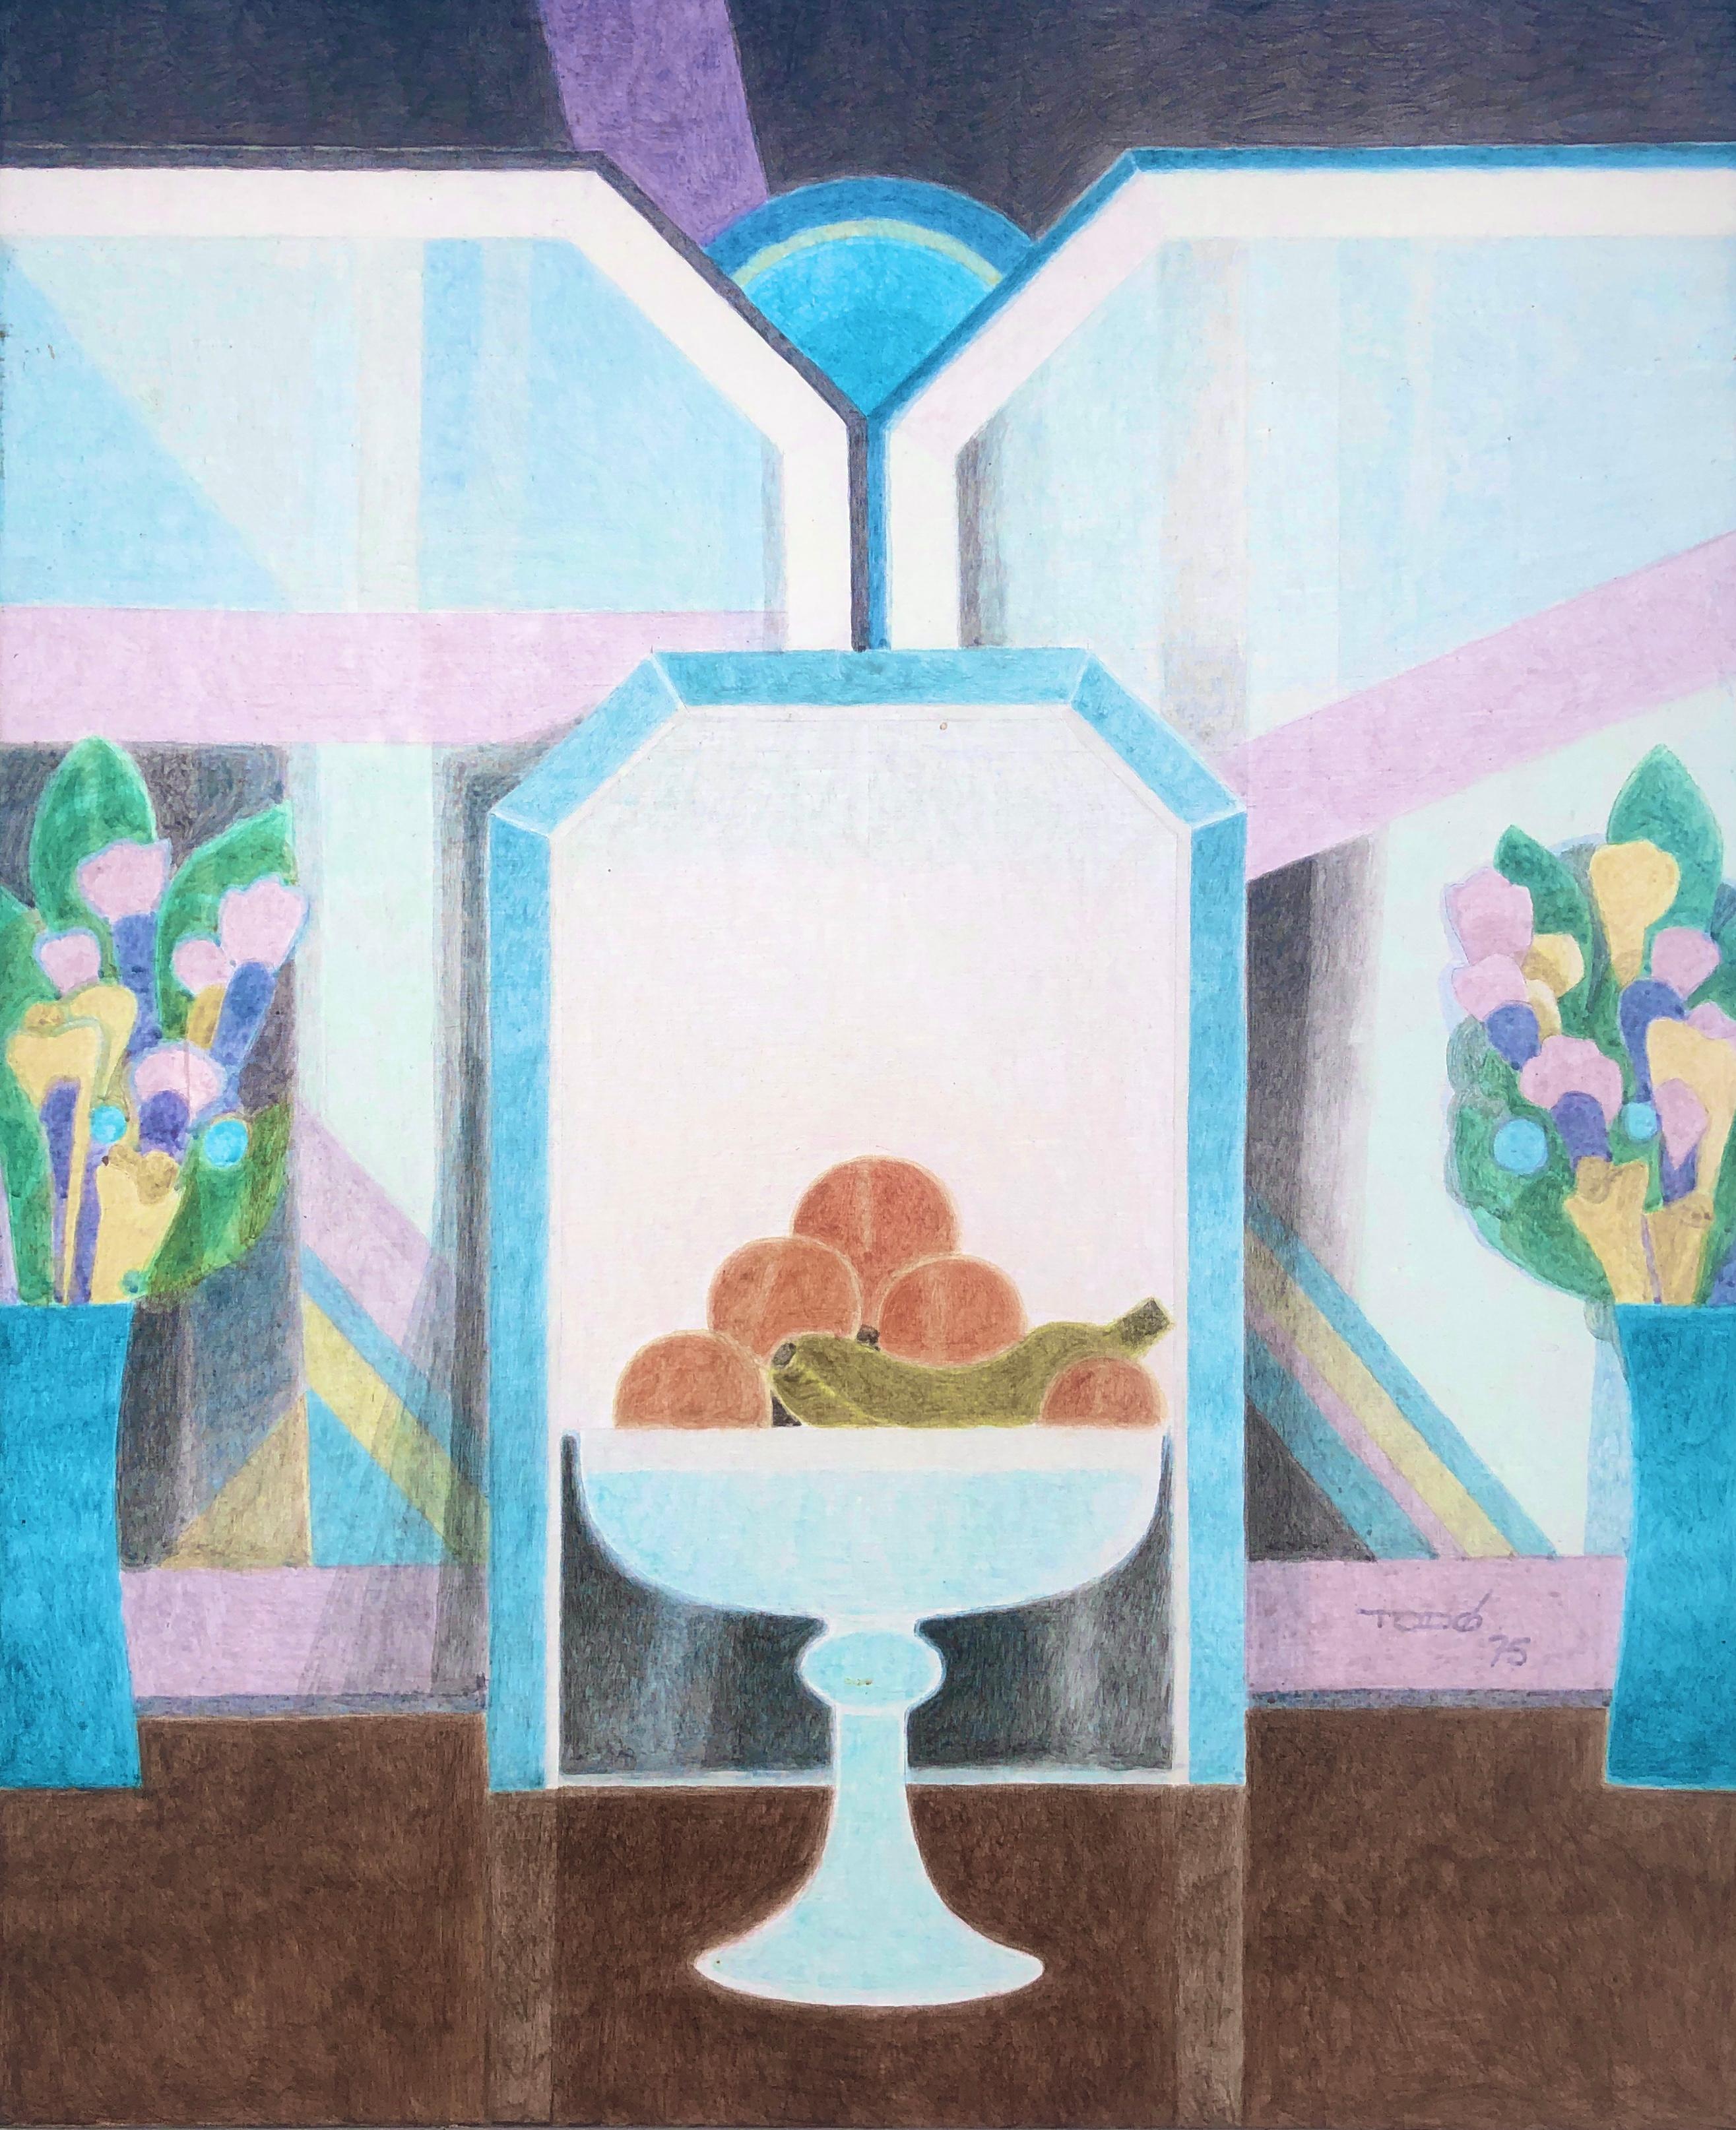 Francesc Todo Still-Life Painting - Symmetrical and mirror in the center oil on canvas painting still life